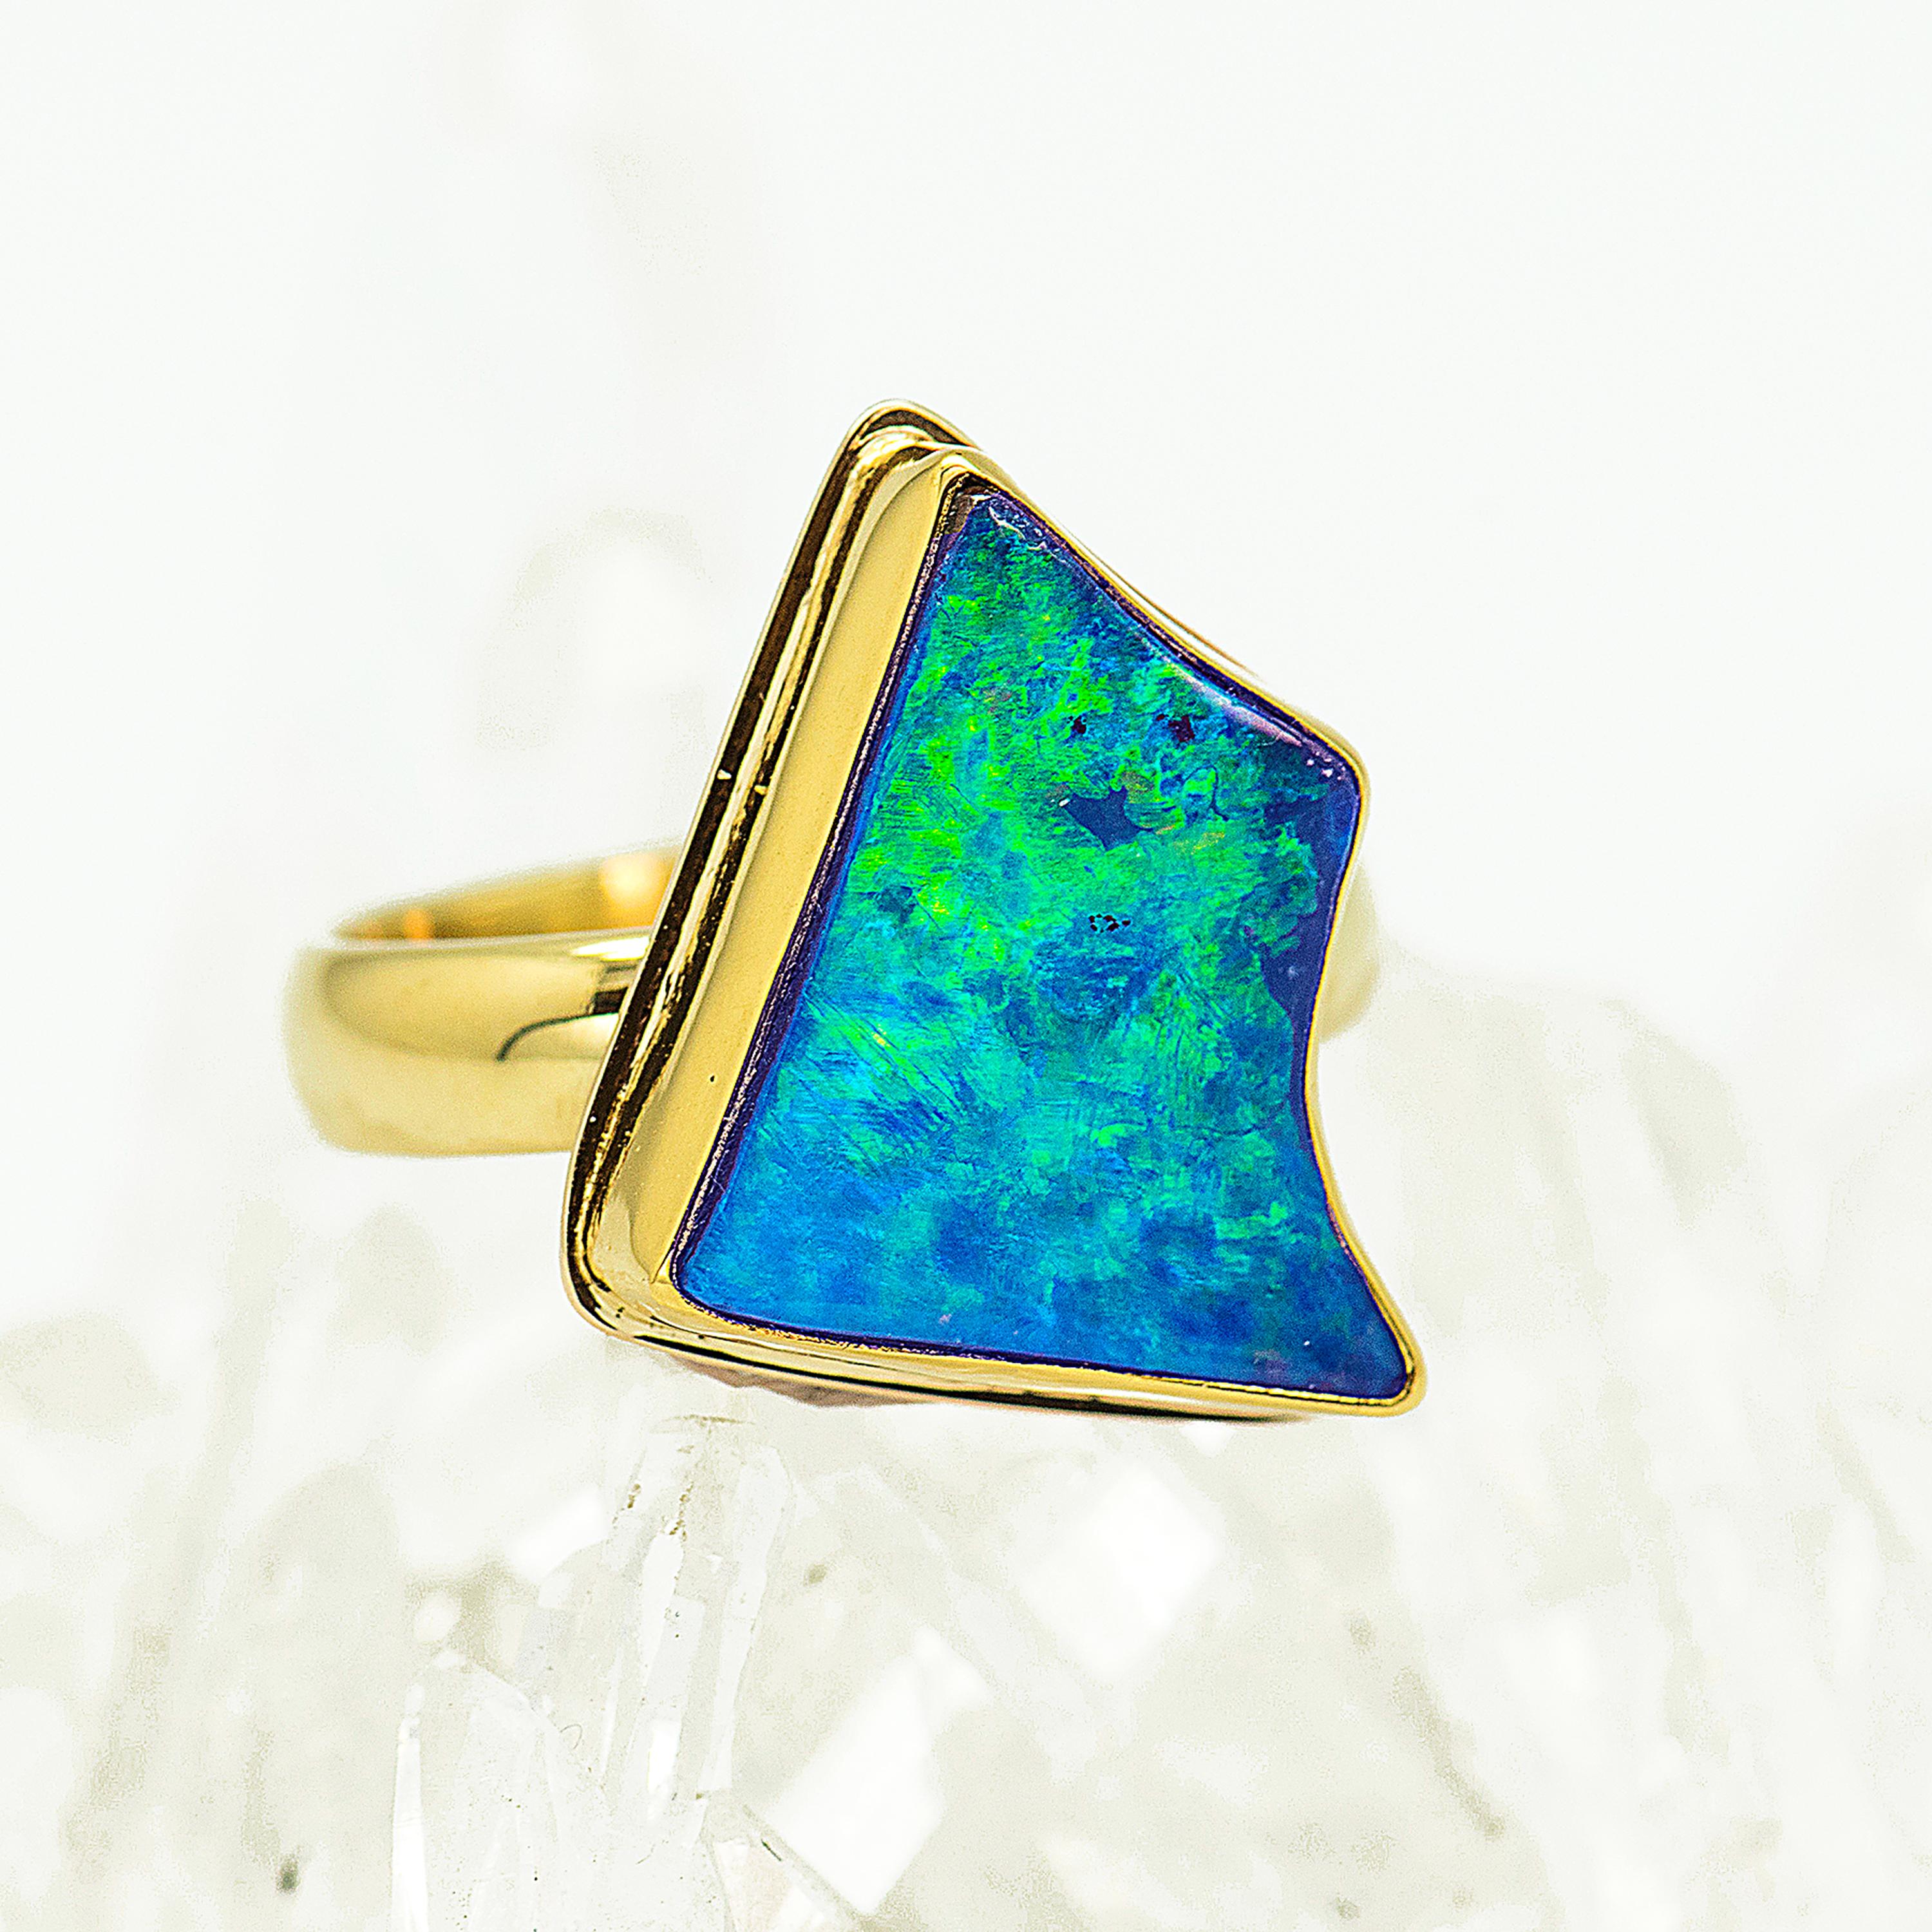 Boulder opal ring in 22k and 18k gold. The green color and flash in this boulder opal is stunning and the shape, so unique. I’m having a hard time not keeping this ring for myself. Boulder opal comes from Queensland, Australia, this particular gem